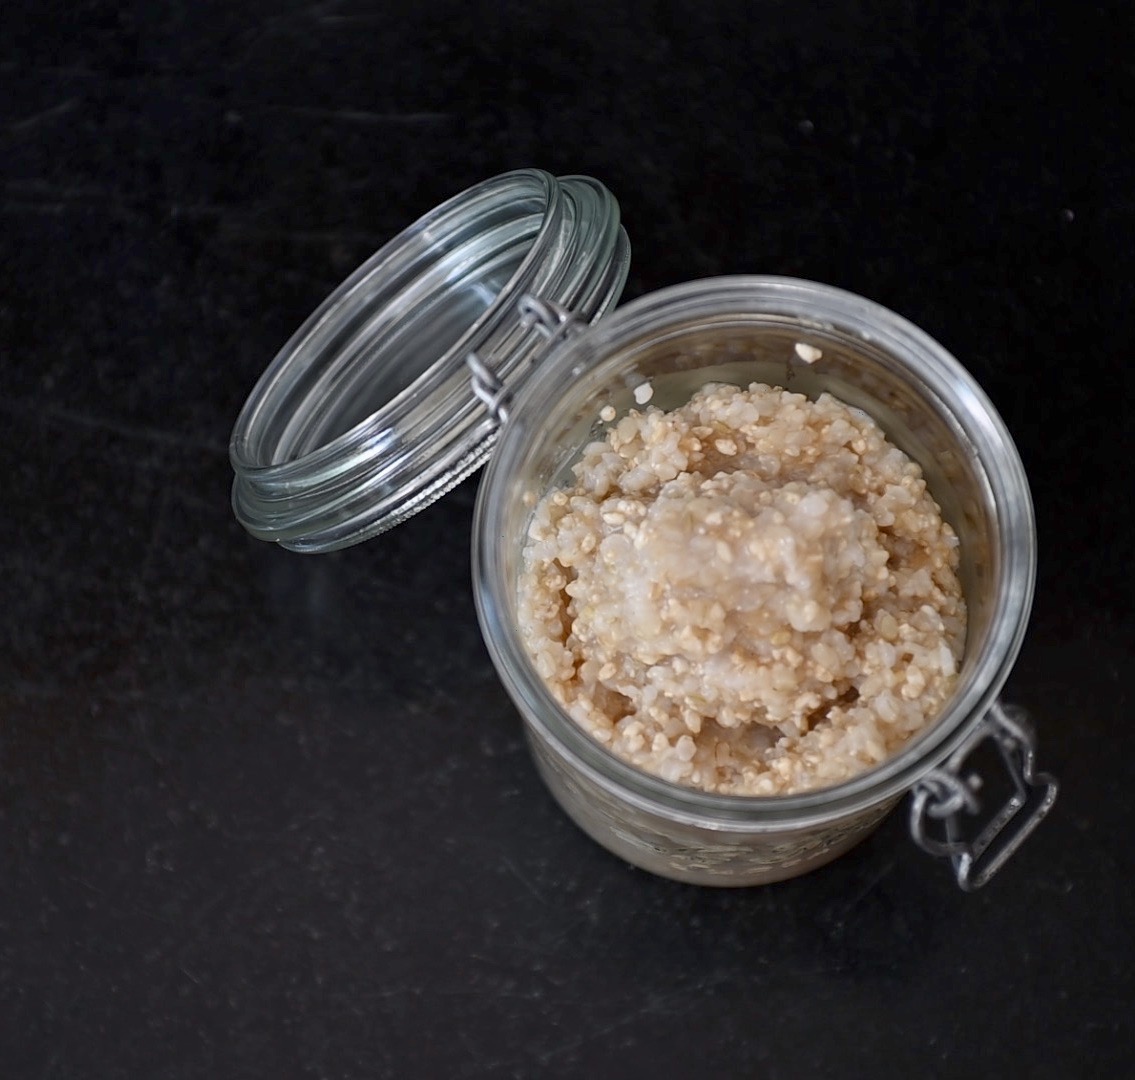 put the rice mixture in a glass jar